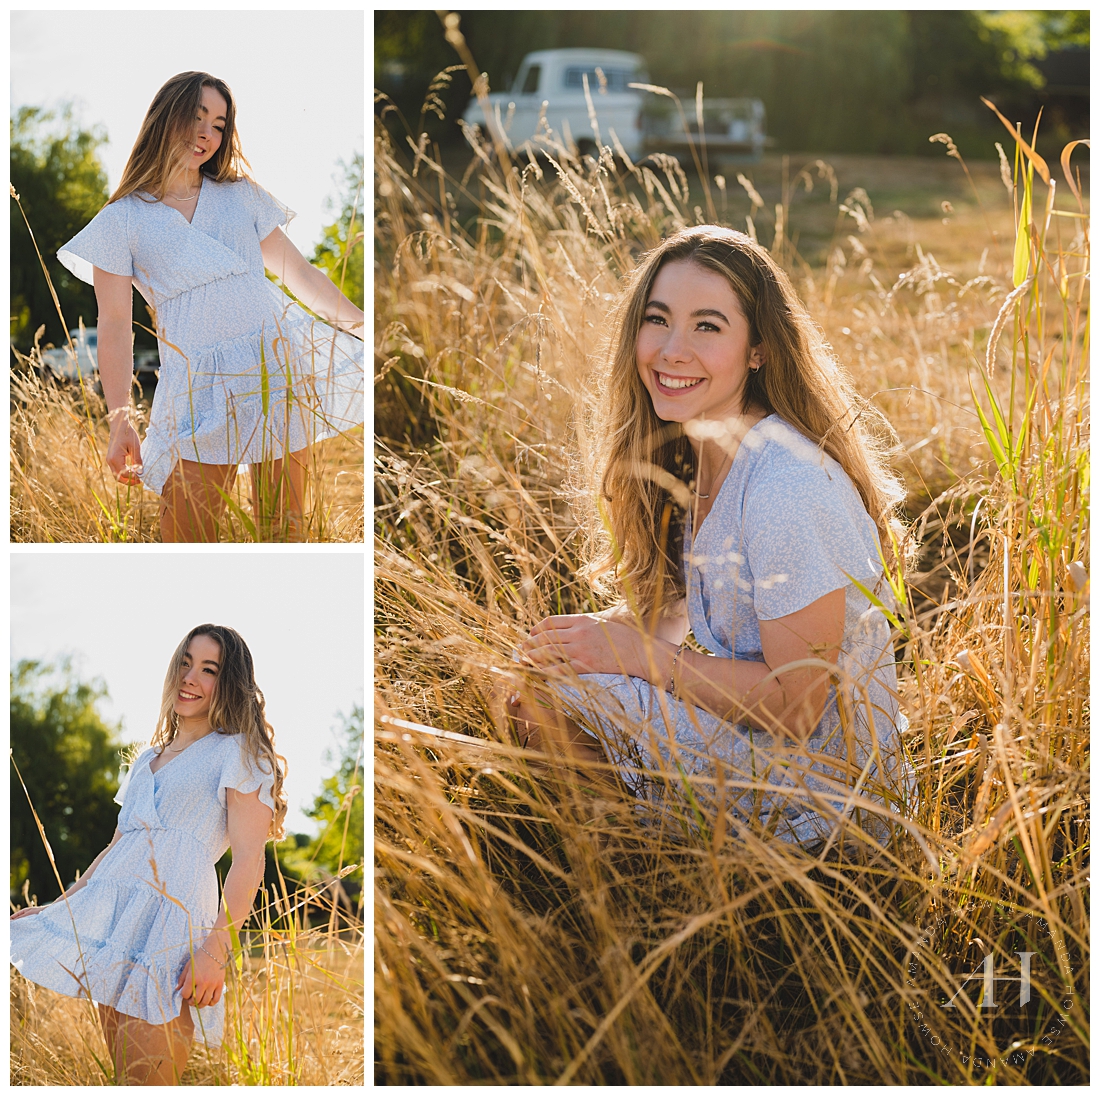 Rustic Senior Photos in Dried Grass Field | Wild Hearts Farm, Summer Senior Session | Photographed by the Best Tacoma Senior Photographer Amanda Howse Photography